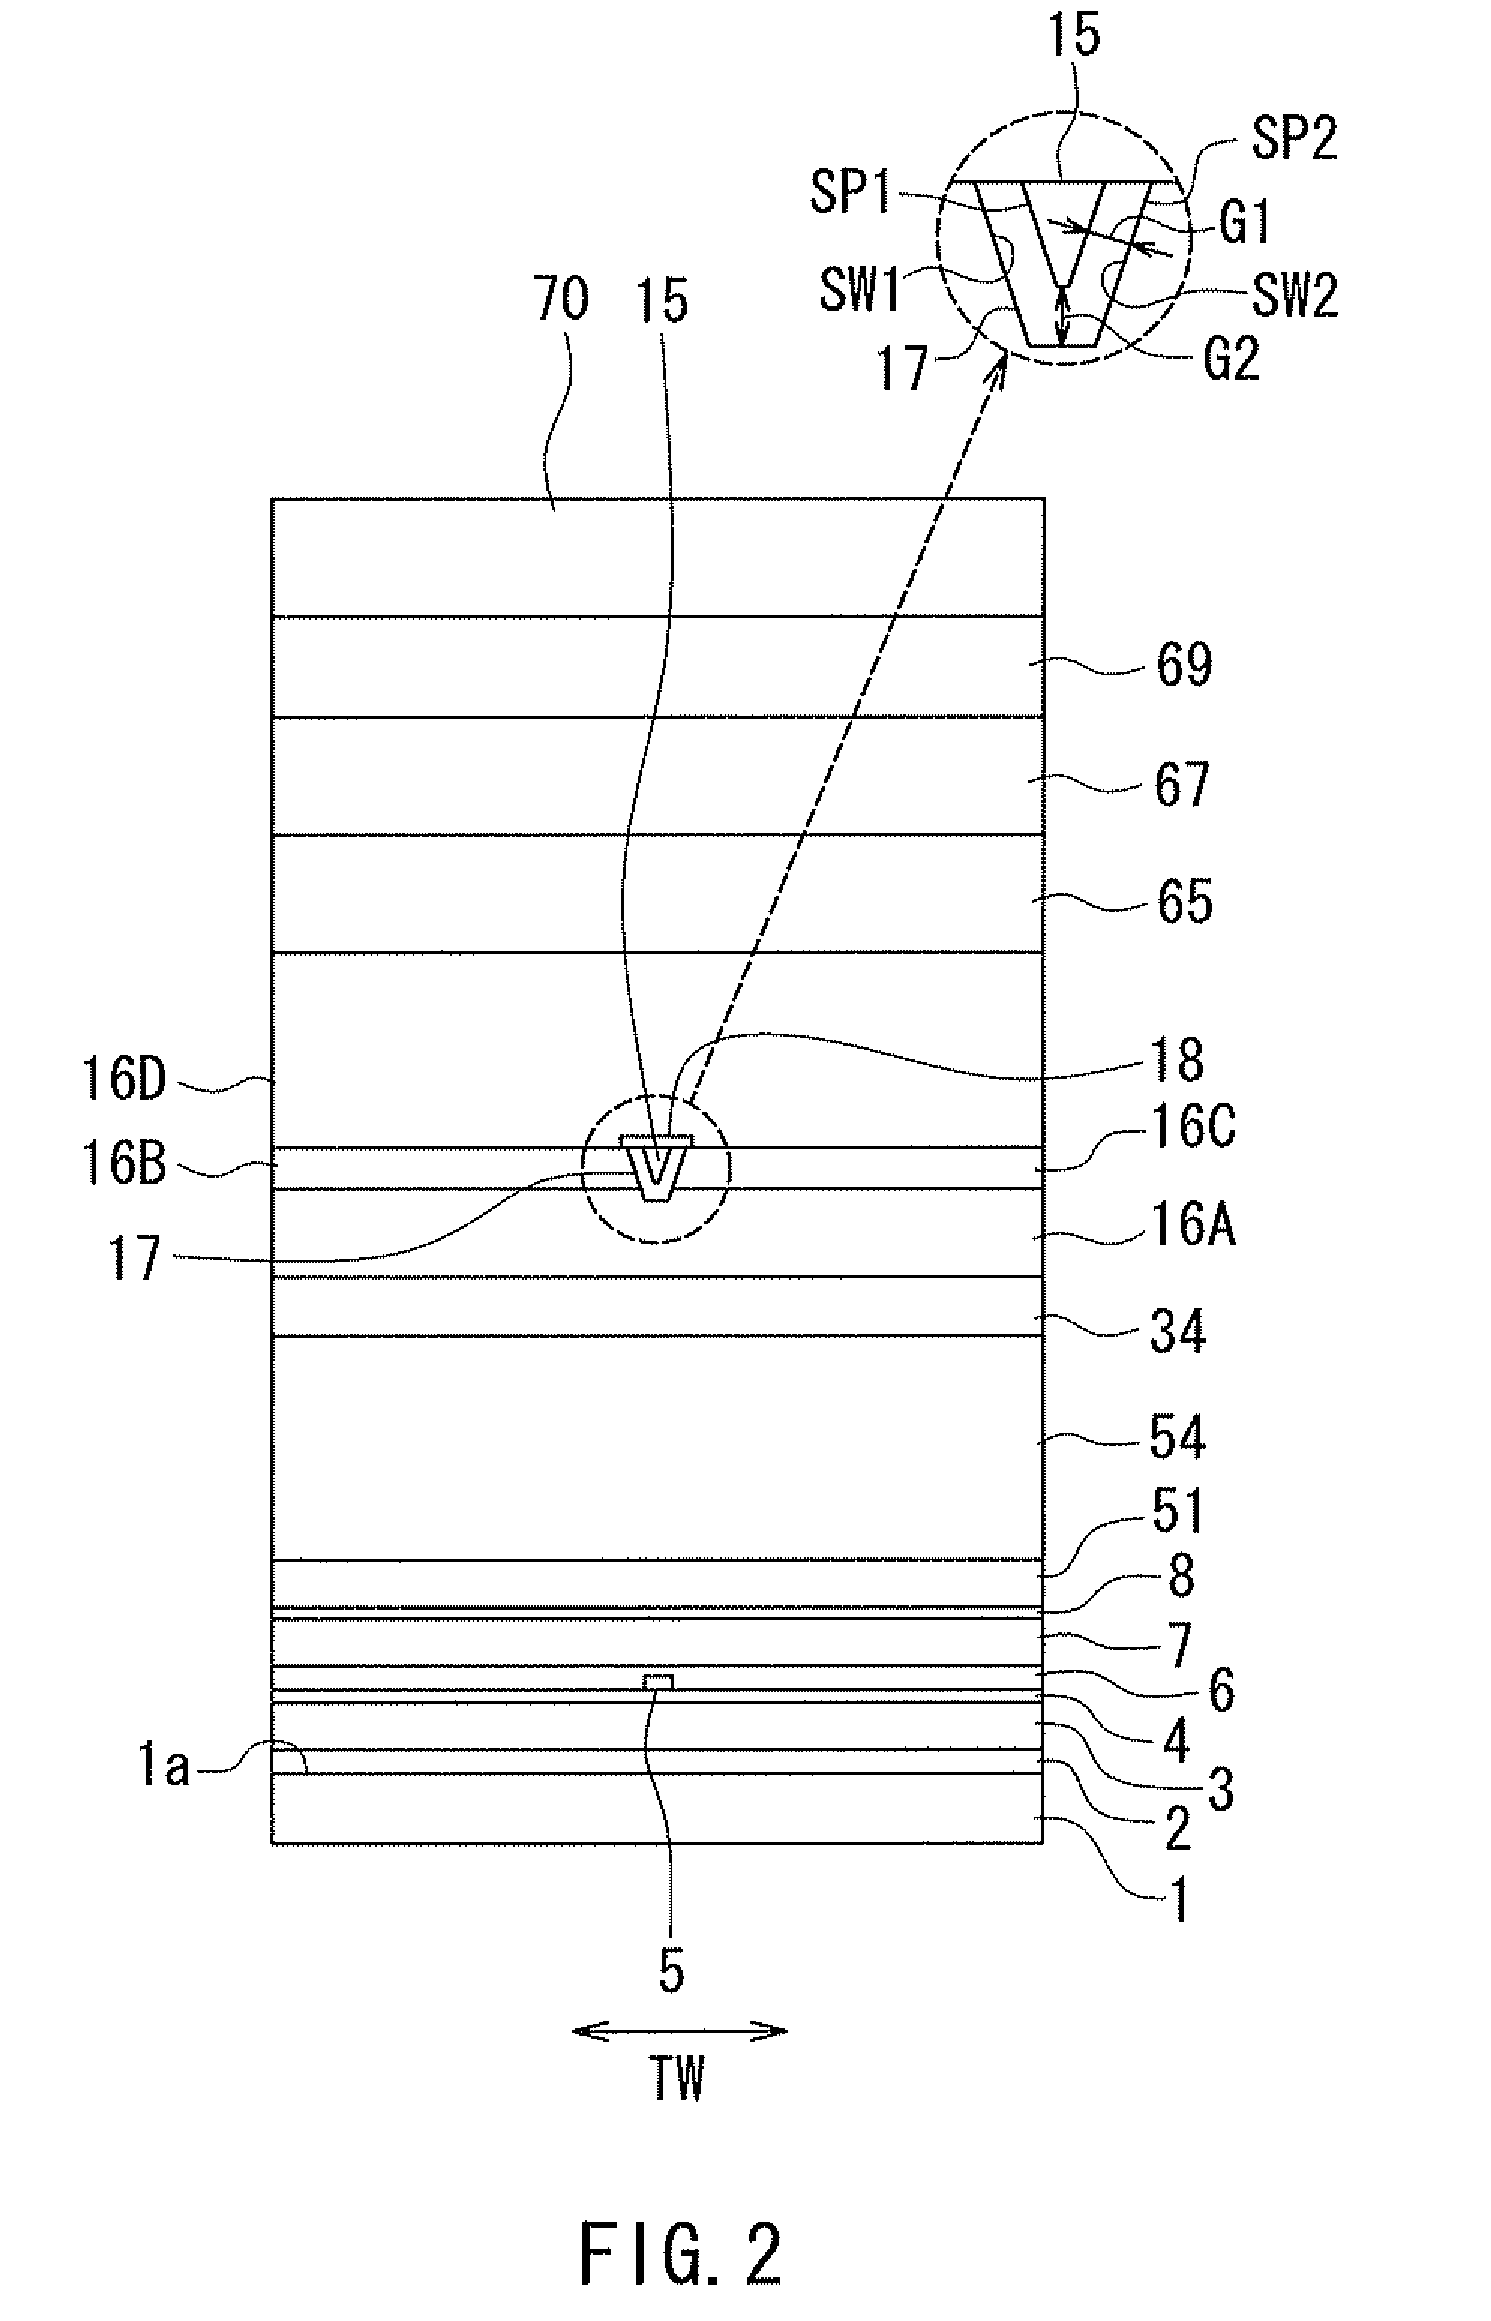 Magnetic head for perpendicular magnetic recording having a main pole and two shields